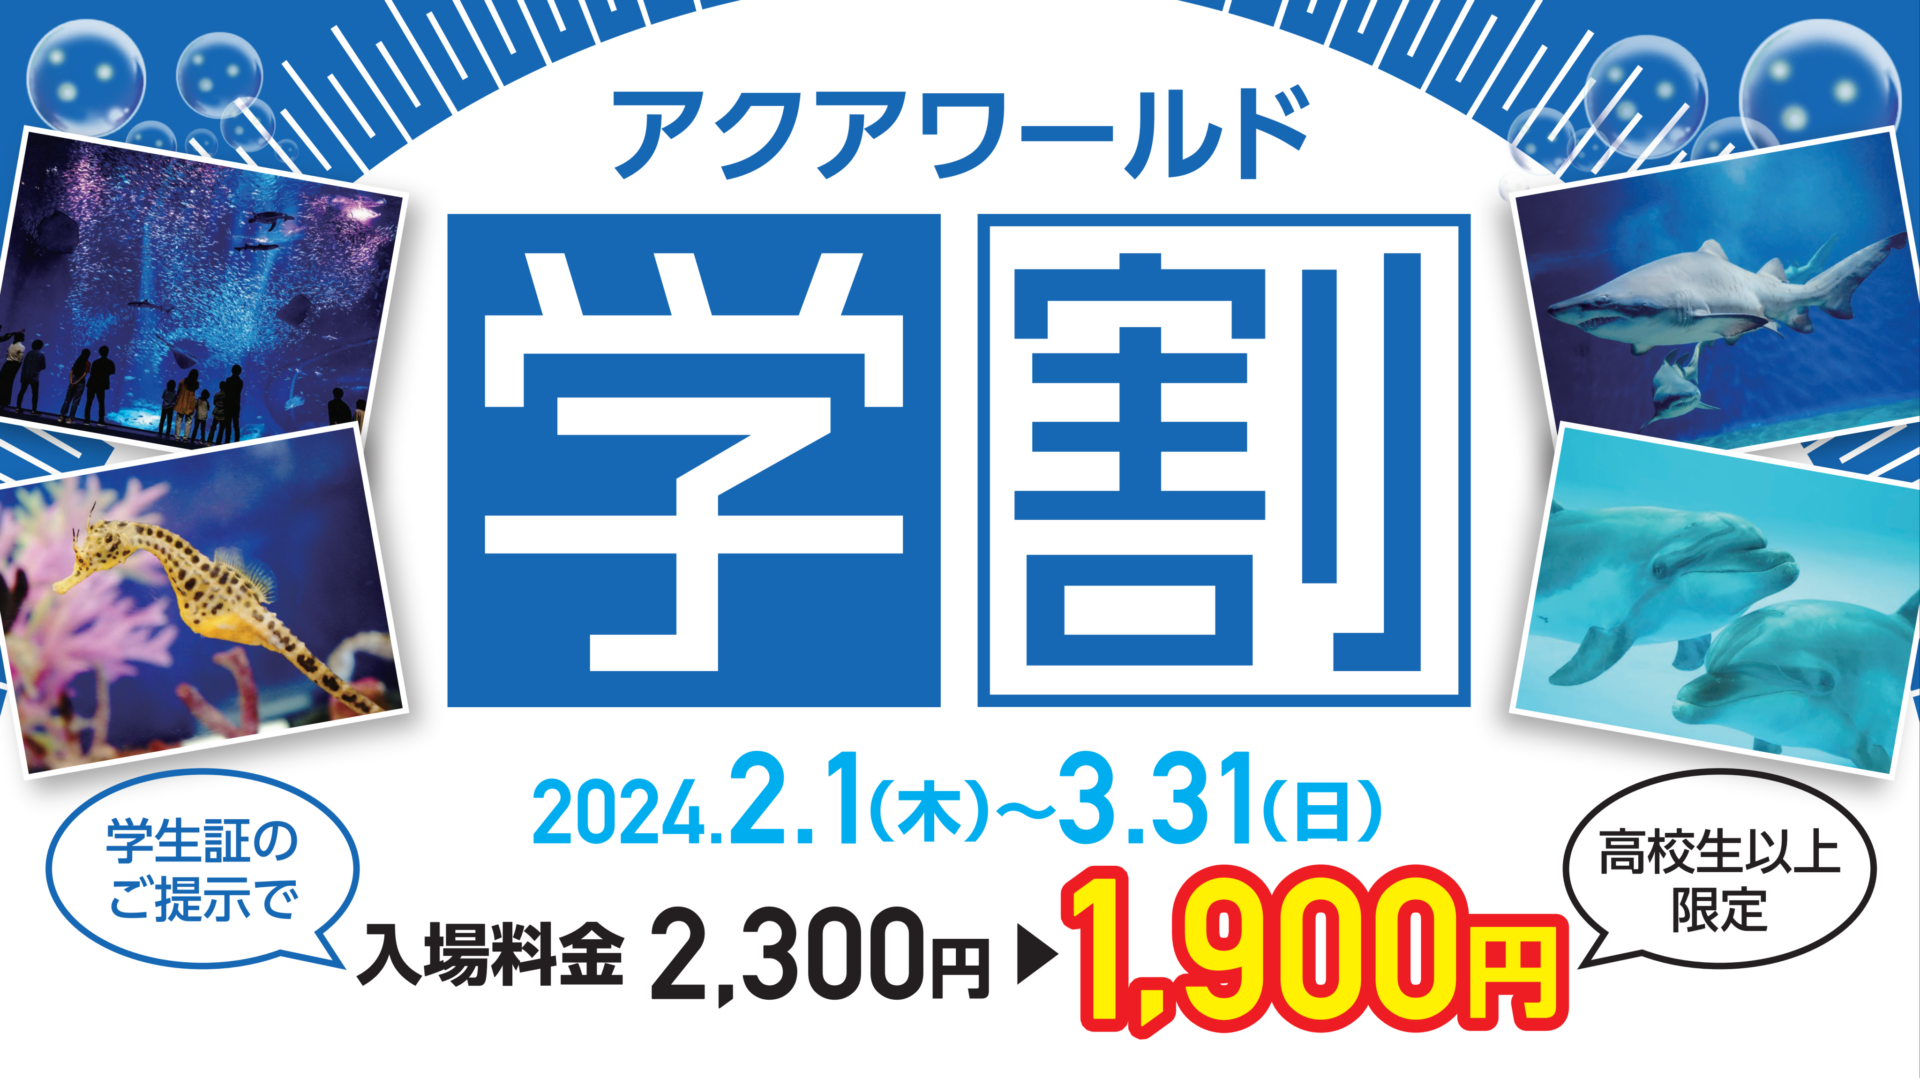 The “Aqua World Student Discount” campaign starts again this year from February 2st (Thursday)!